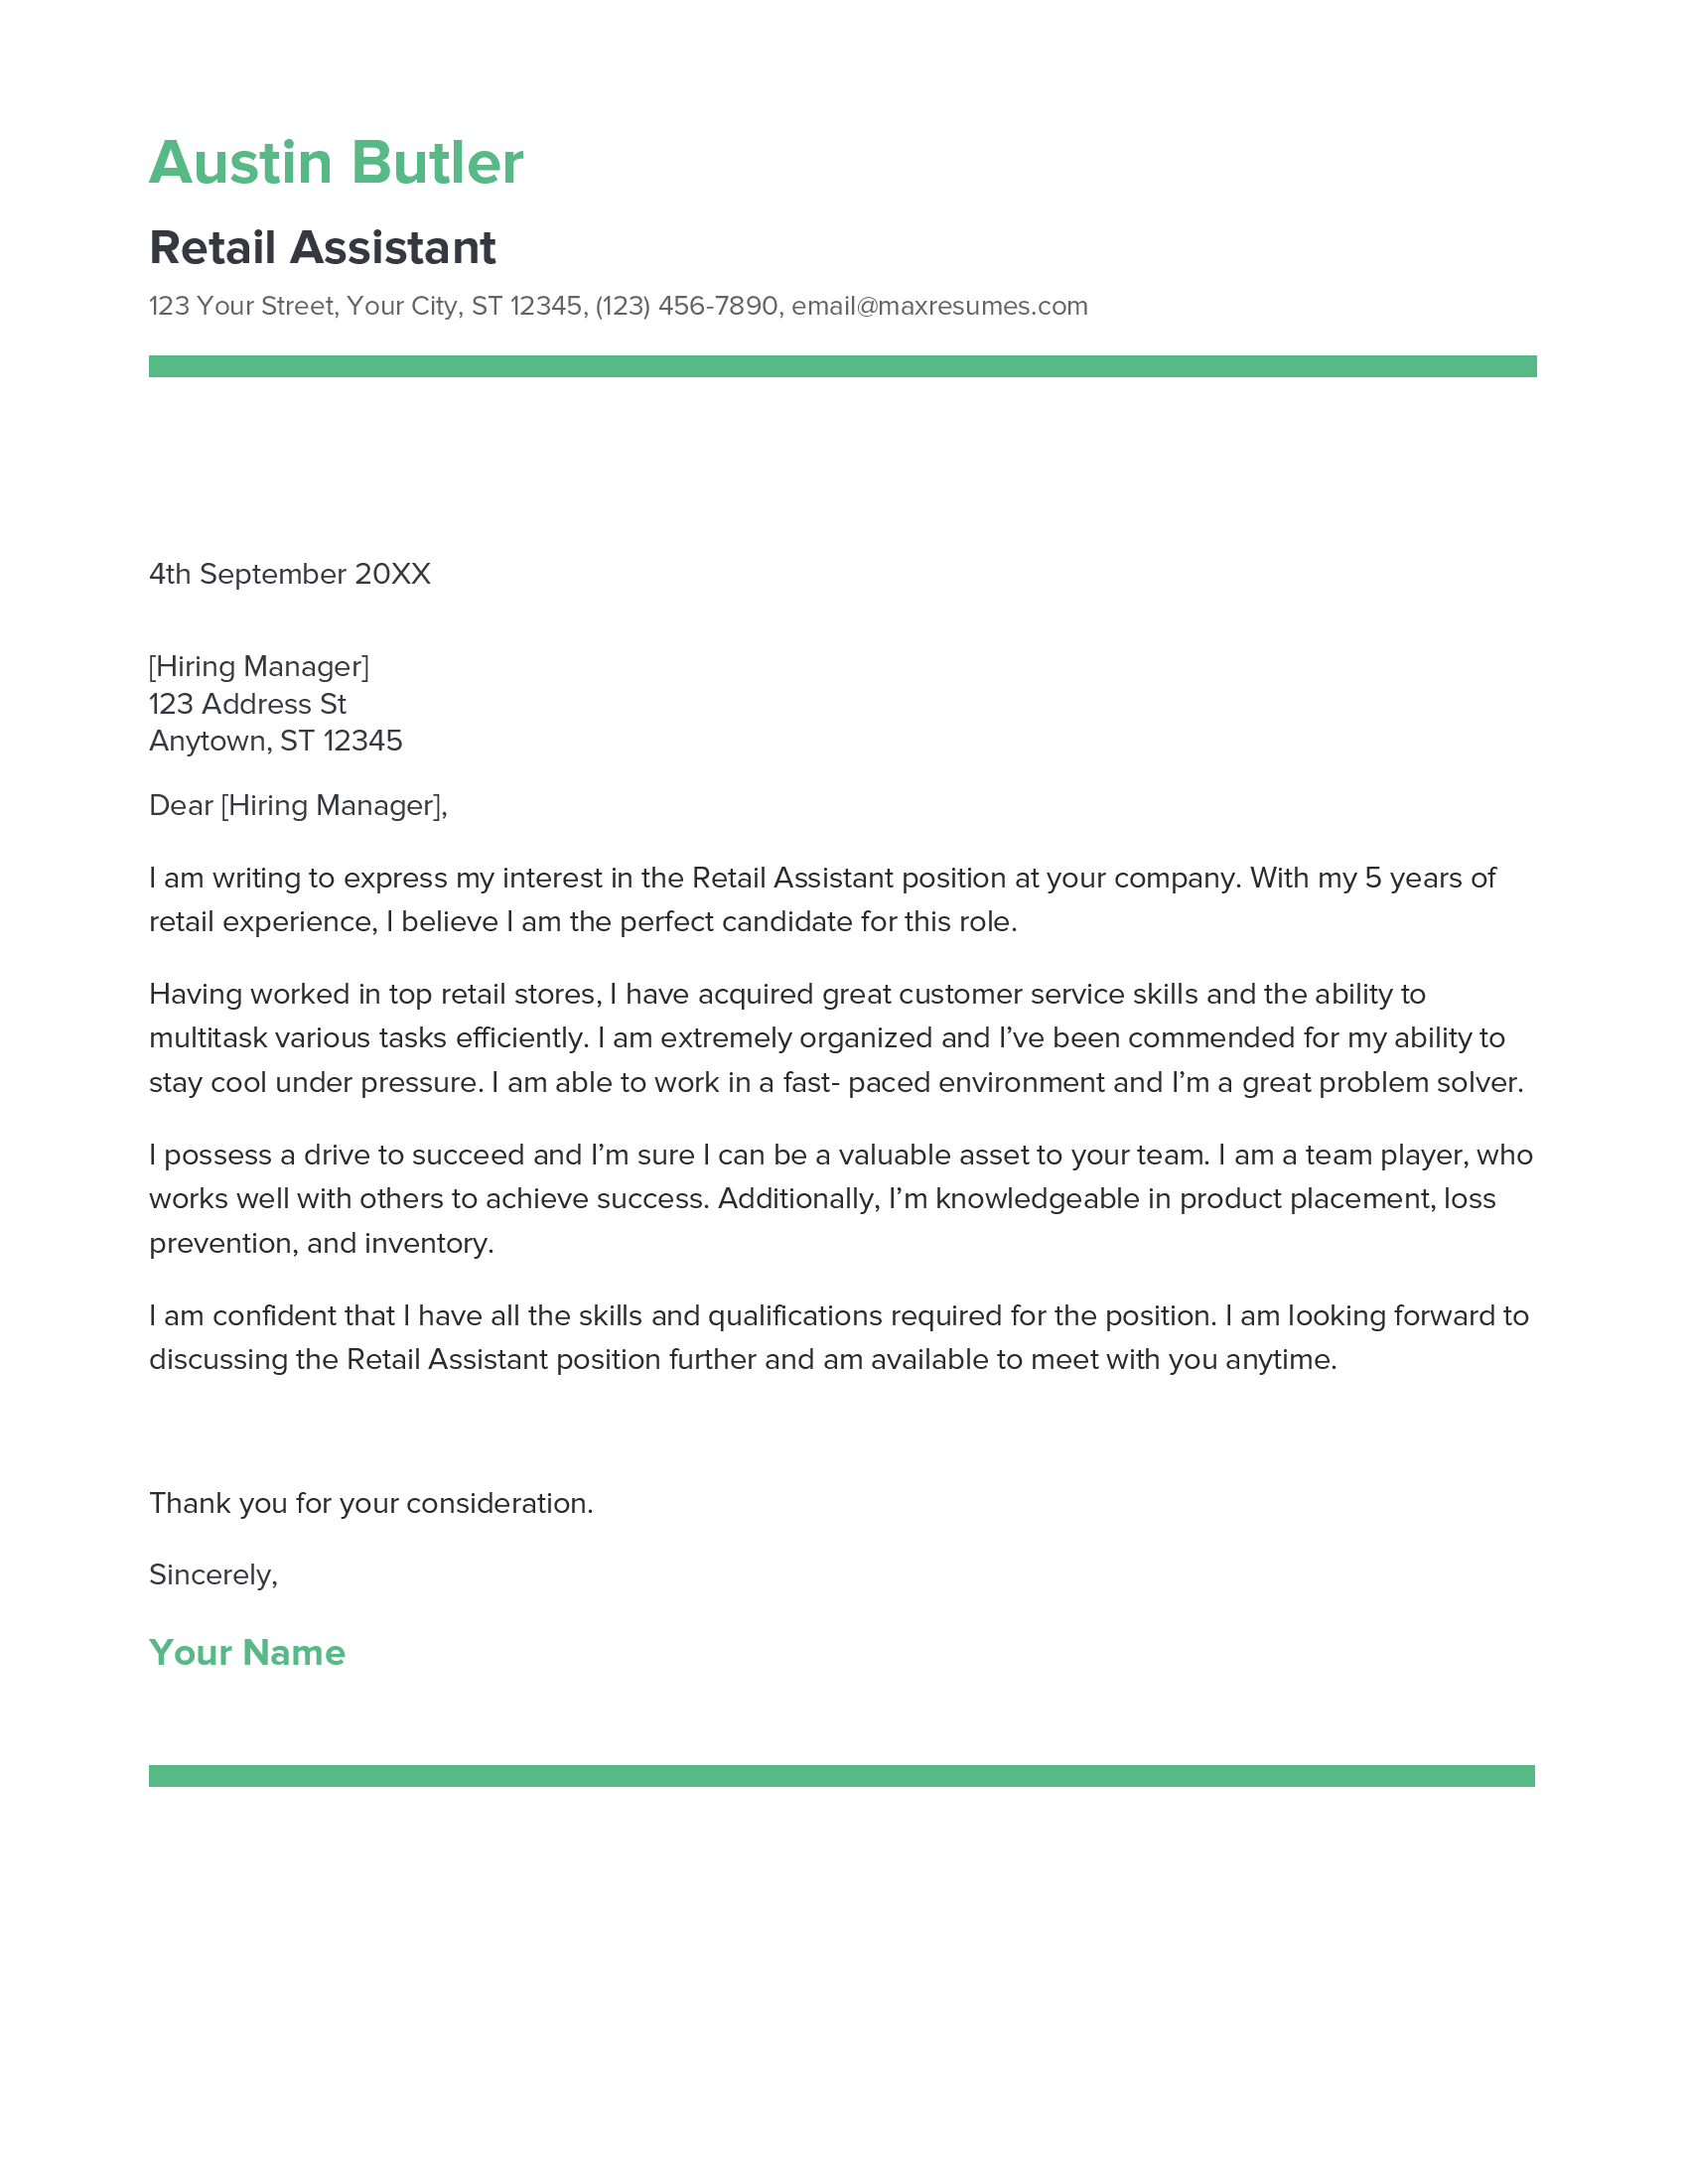 Retail Assistant Cover Letter Example